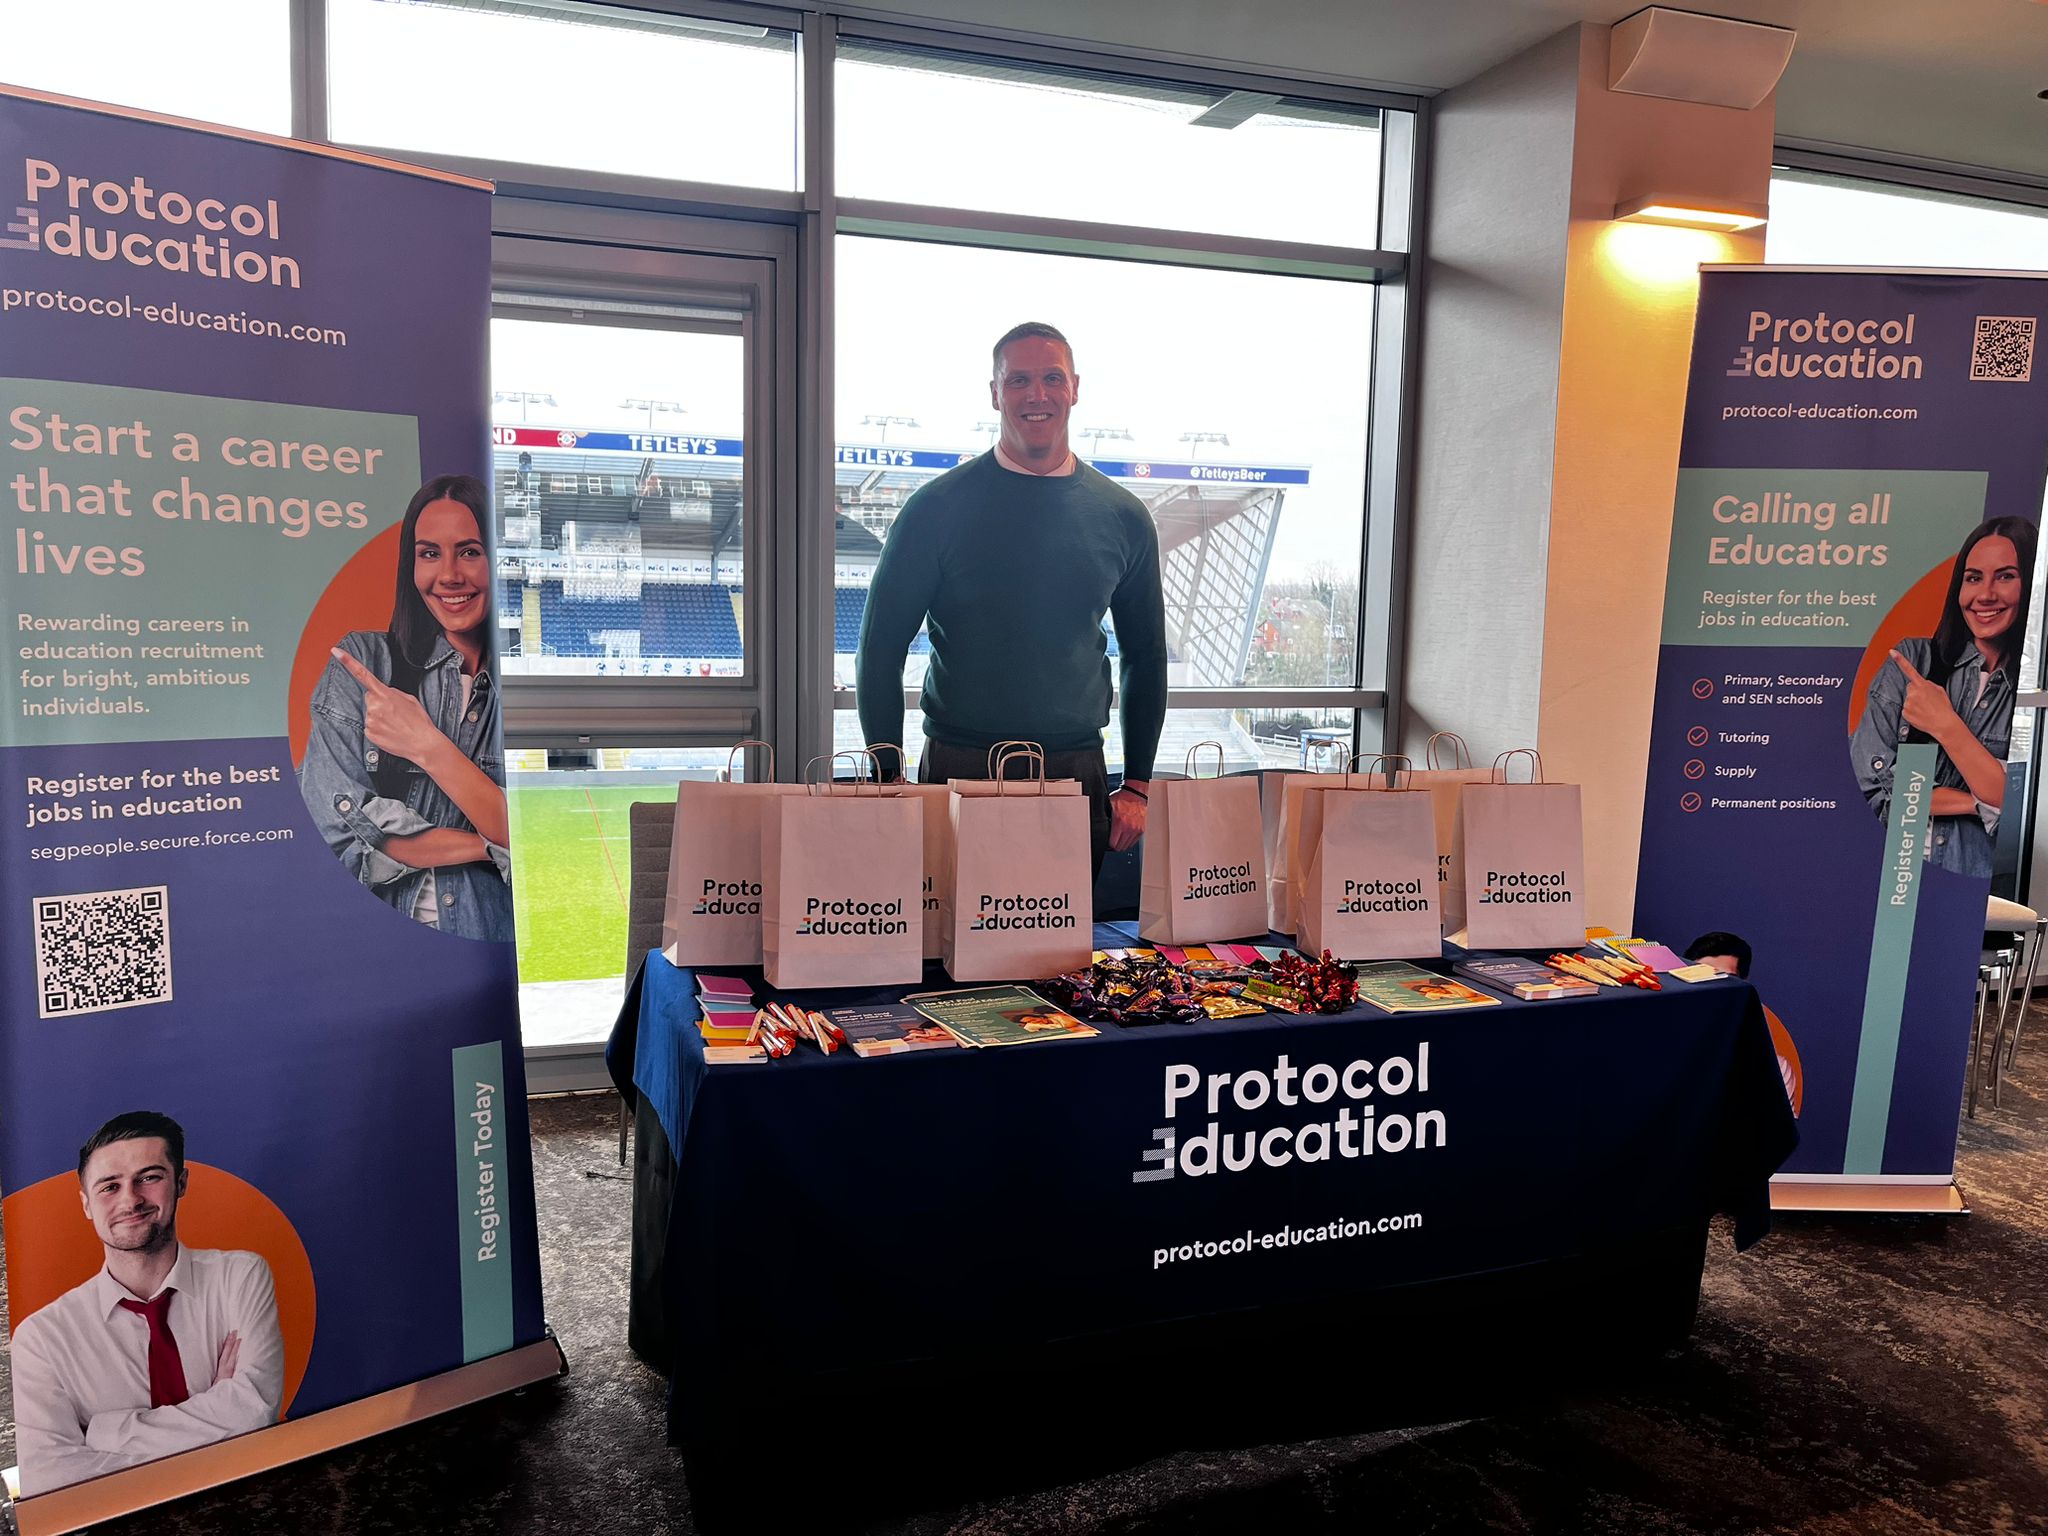 Protocol Education Leeds at our event in Leeds